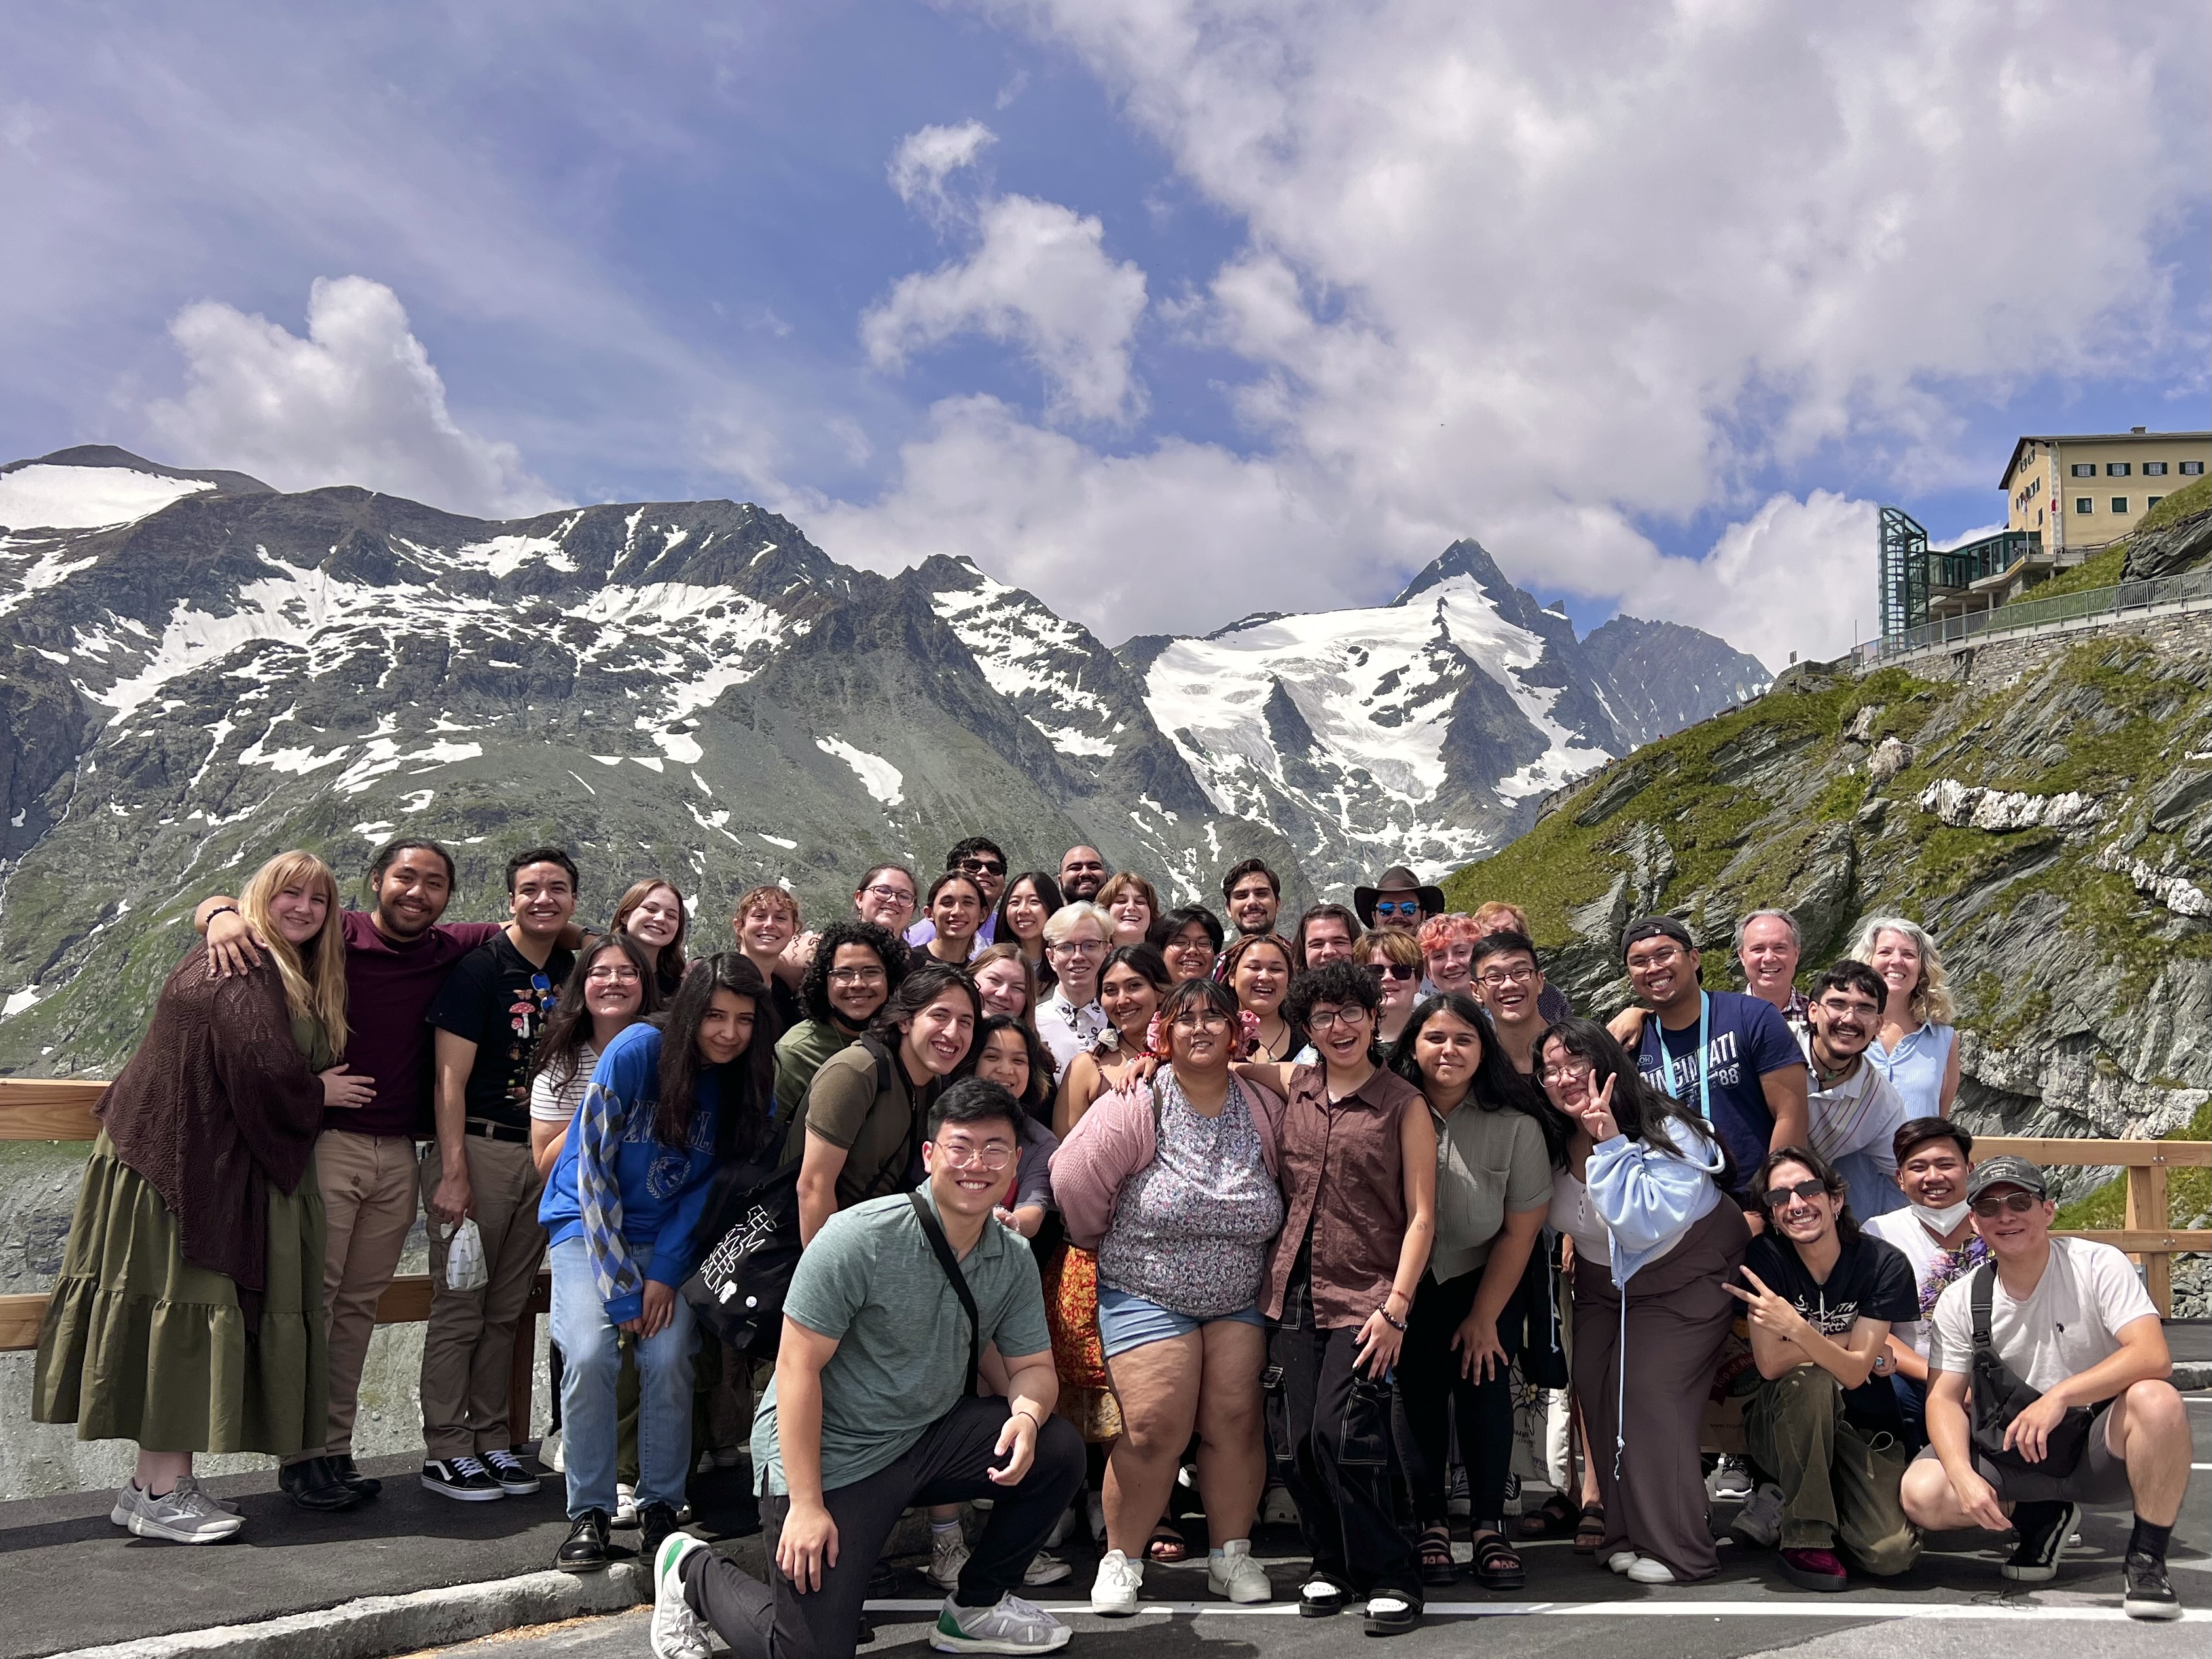 Group of people gathered for photo in front of picturesque mountains.